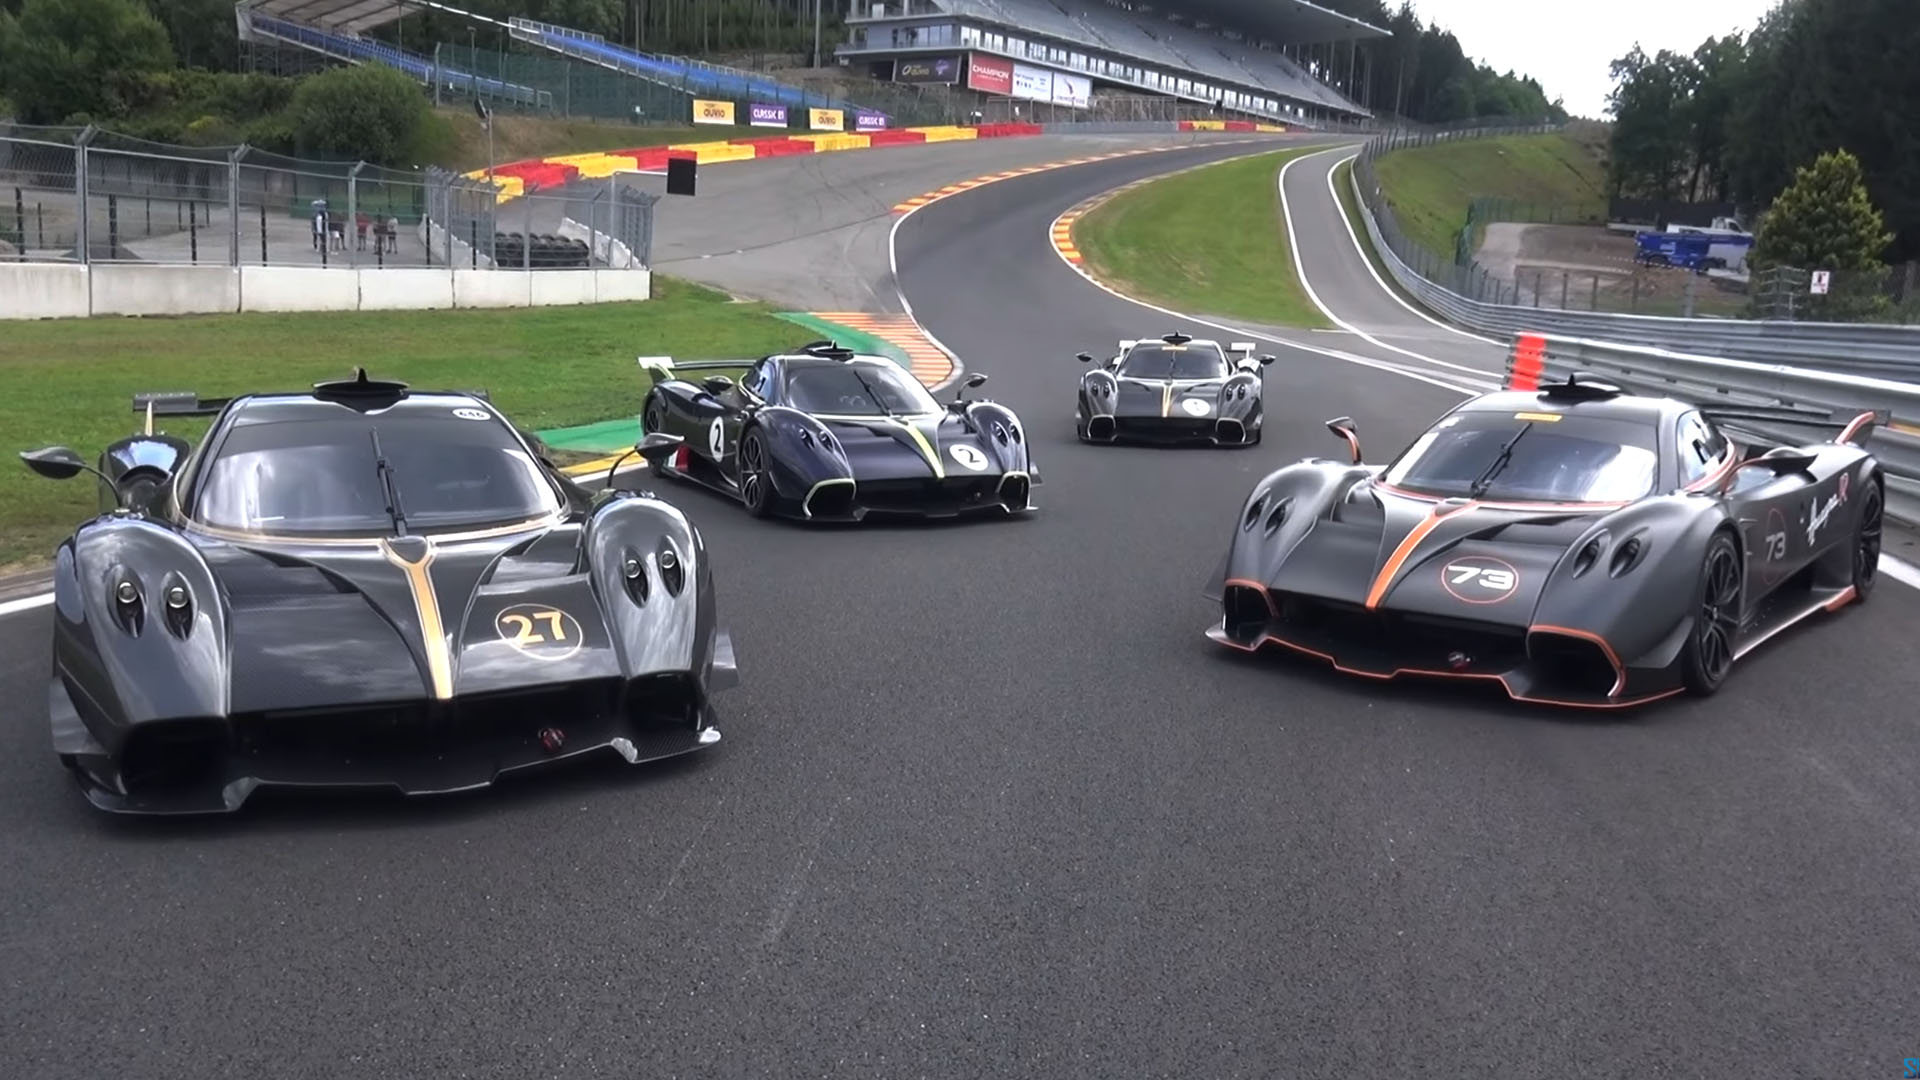 Image showing four Pagani Huayra R hypercars parked  on a race track